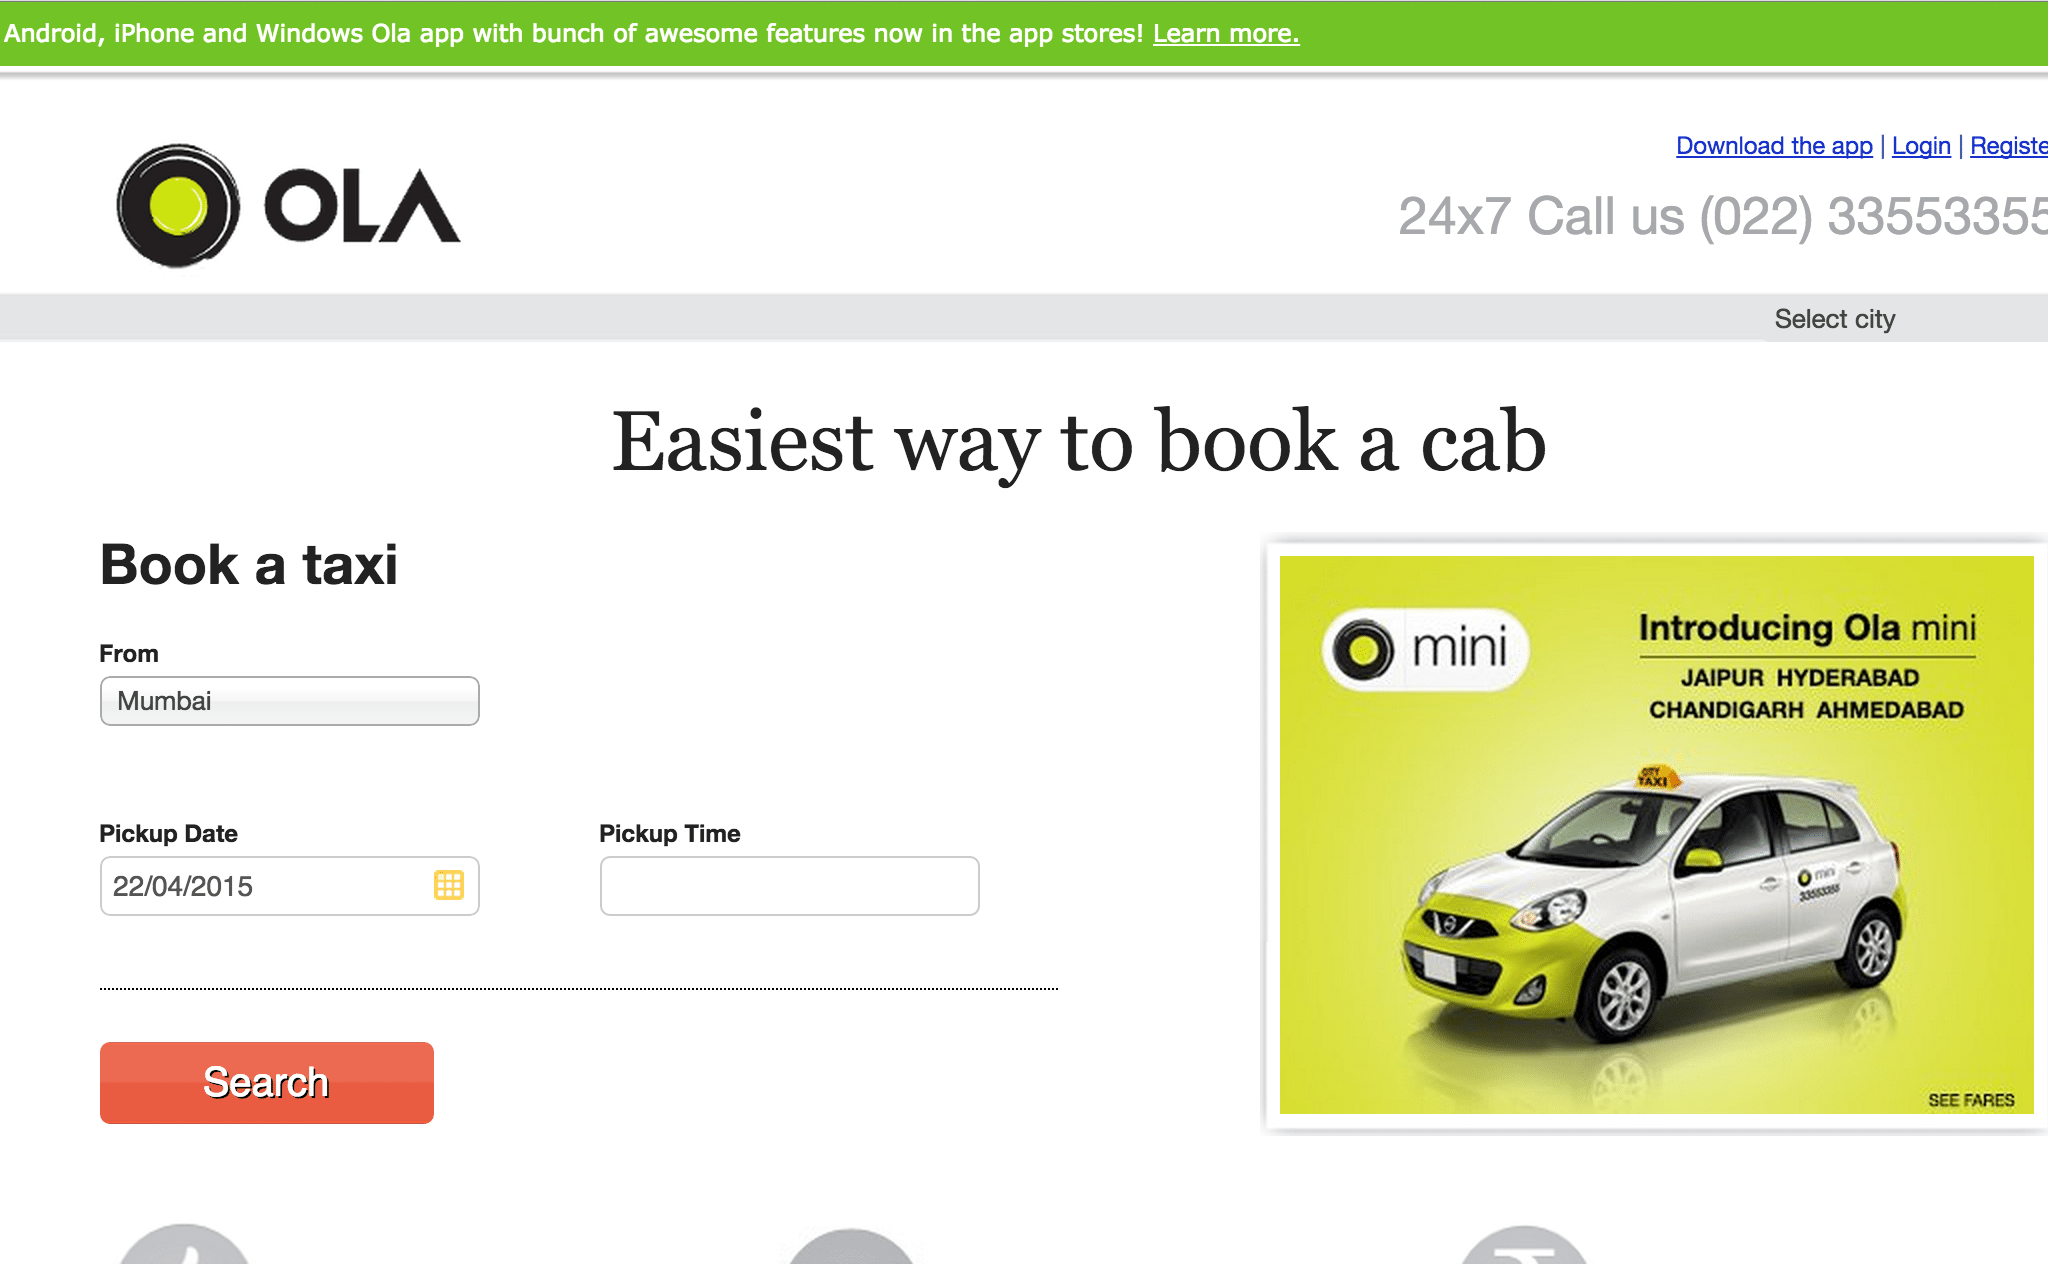 Ola is one of the largest mobile app cab-booking companies in India.